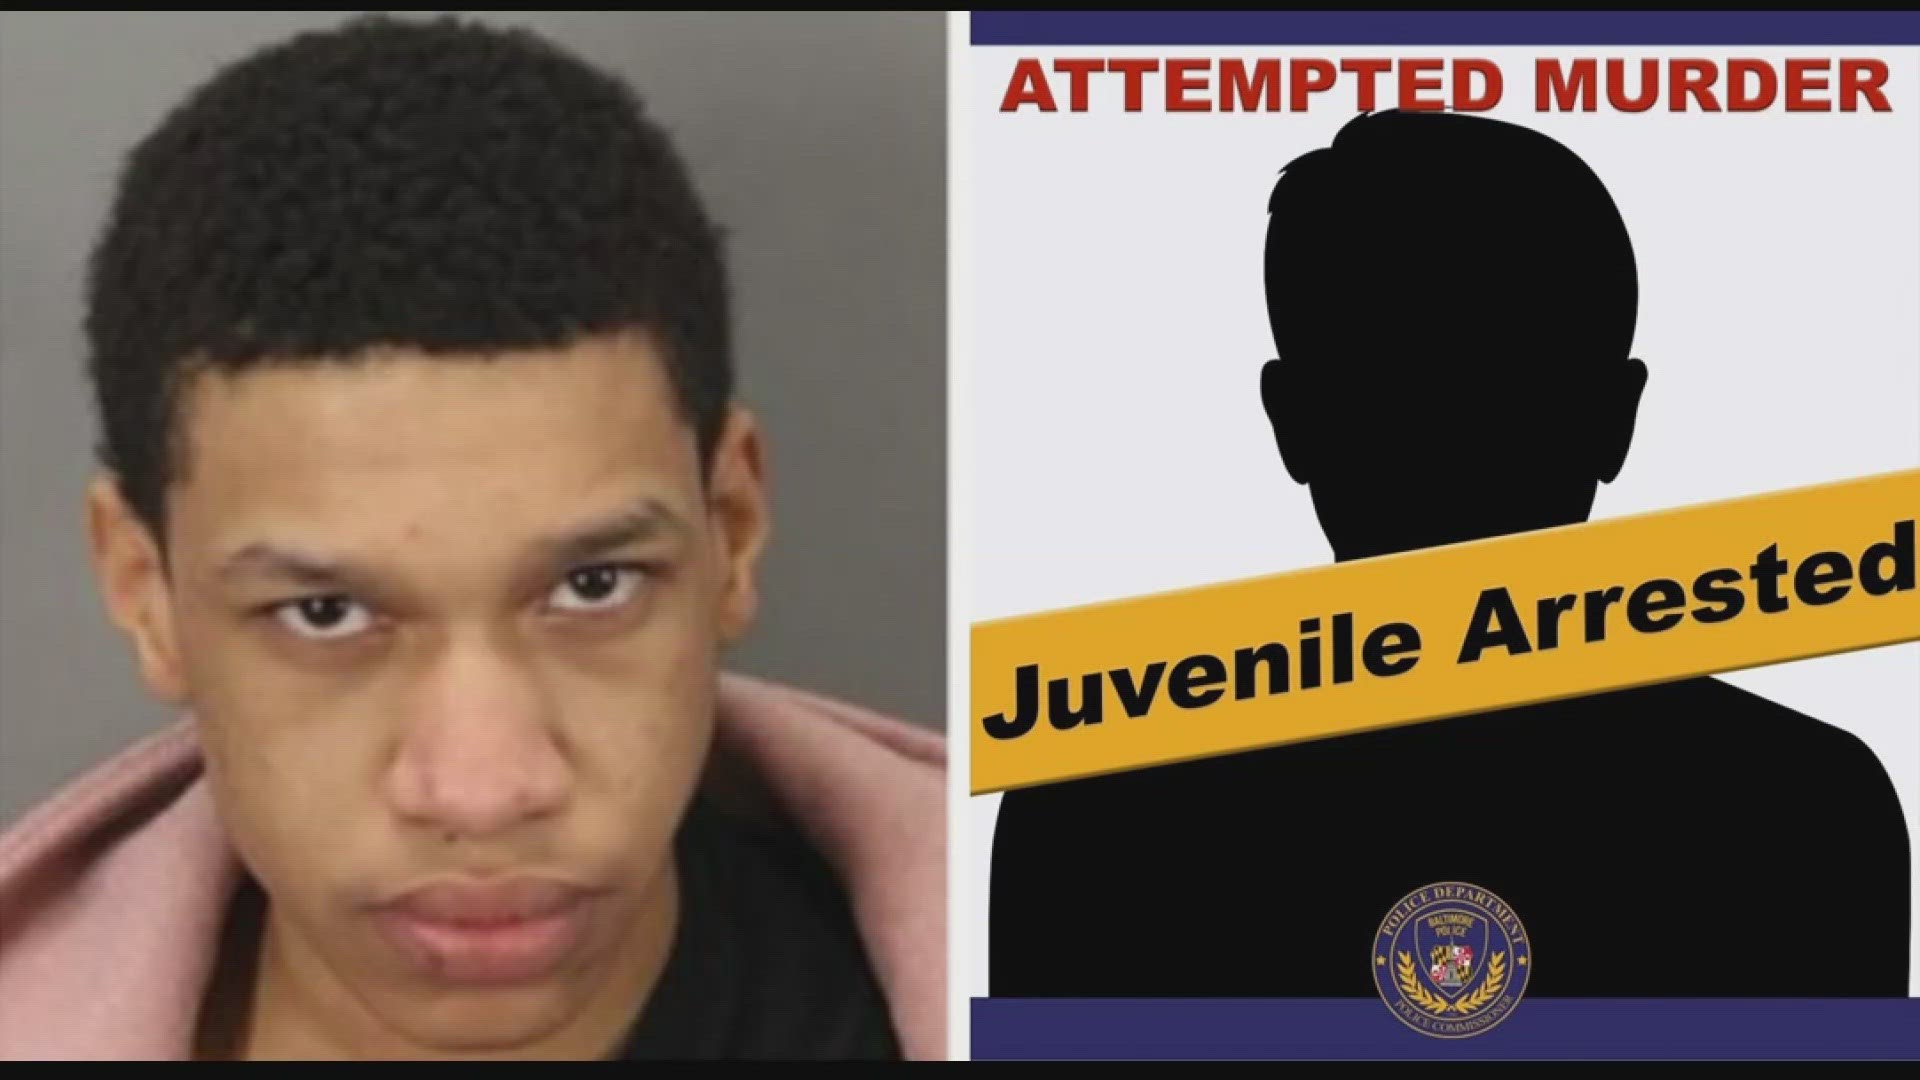 A 17-year-old boy has been arrested and police are looking for an 18-year-old man in connection to the mass shooting at Morgan State University last week.